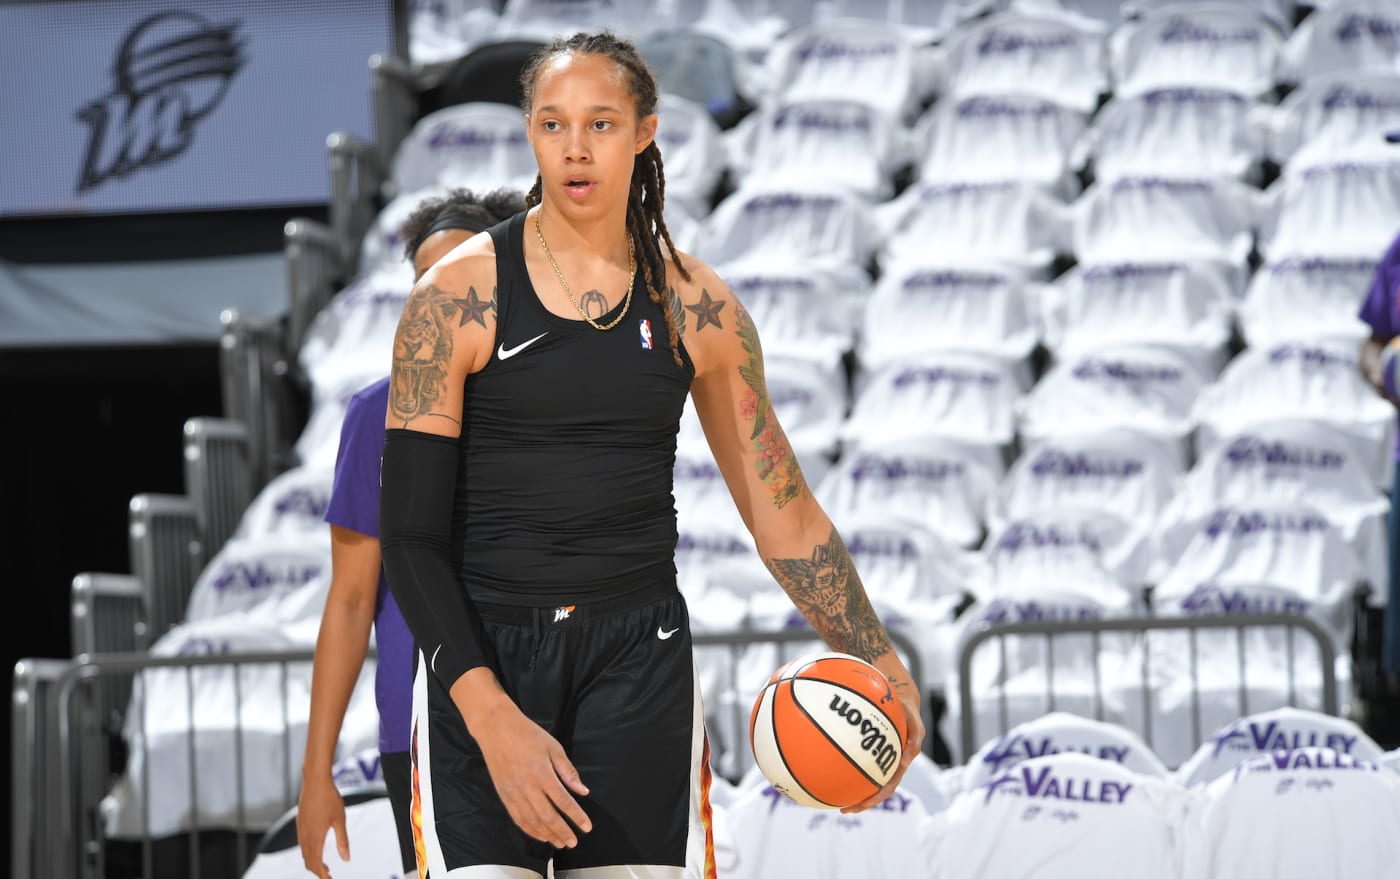 Wnba Star Brittney Griner Detained In Russia On Drug Charges Update Complex